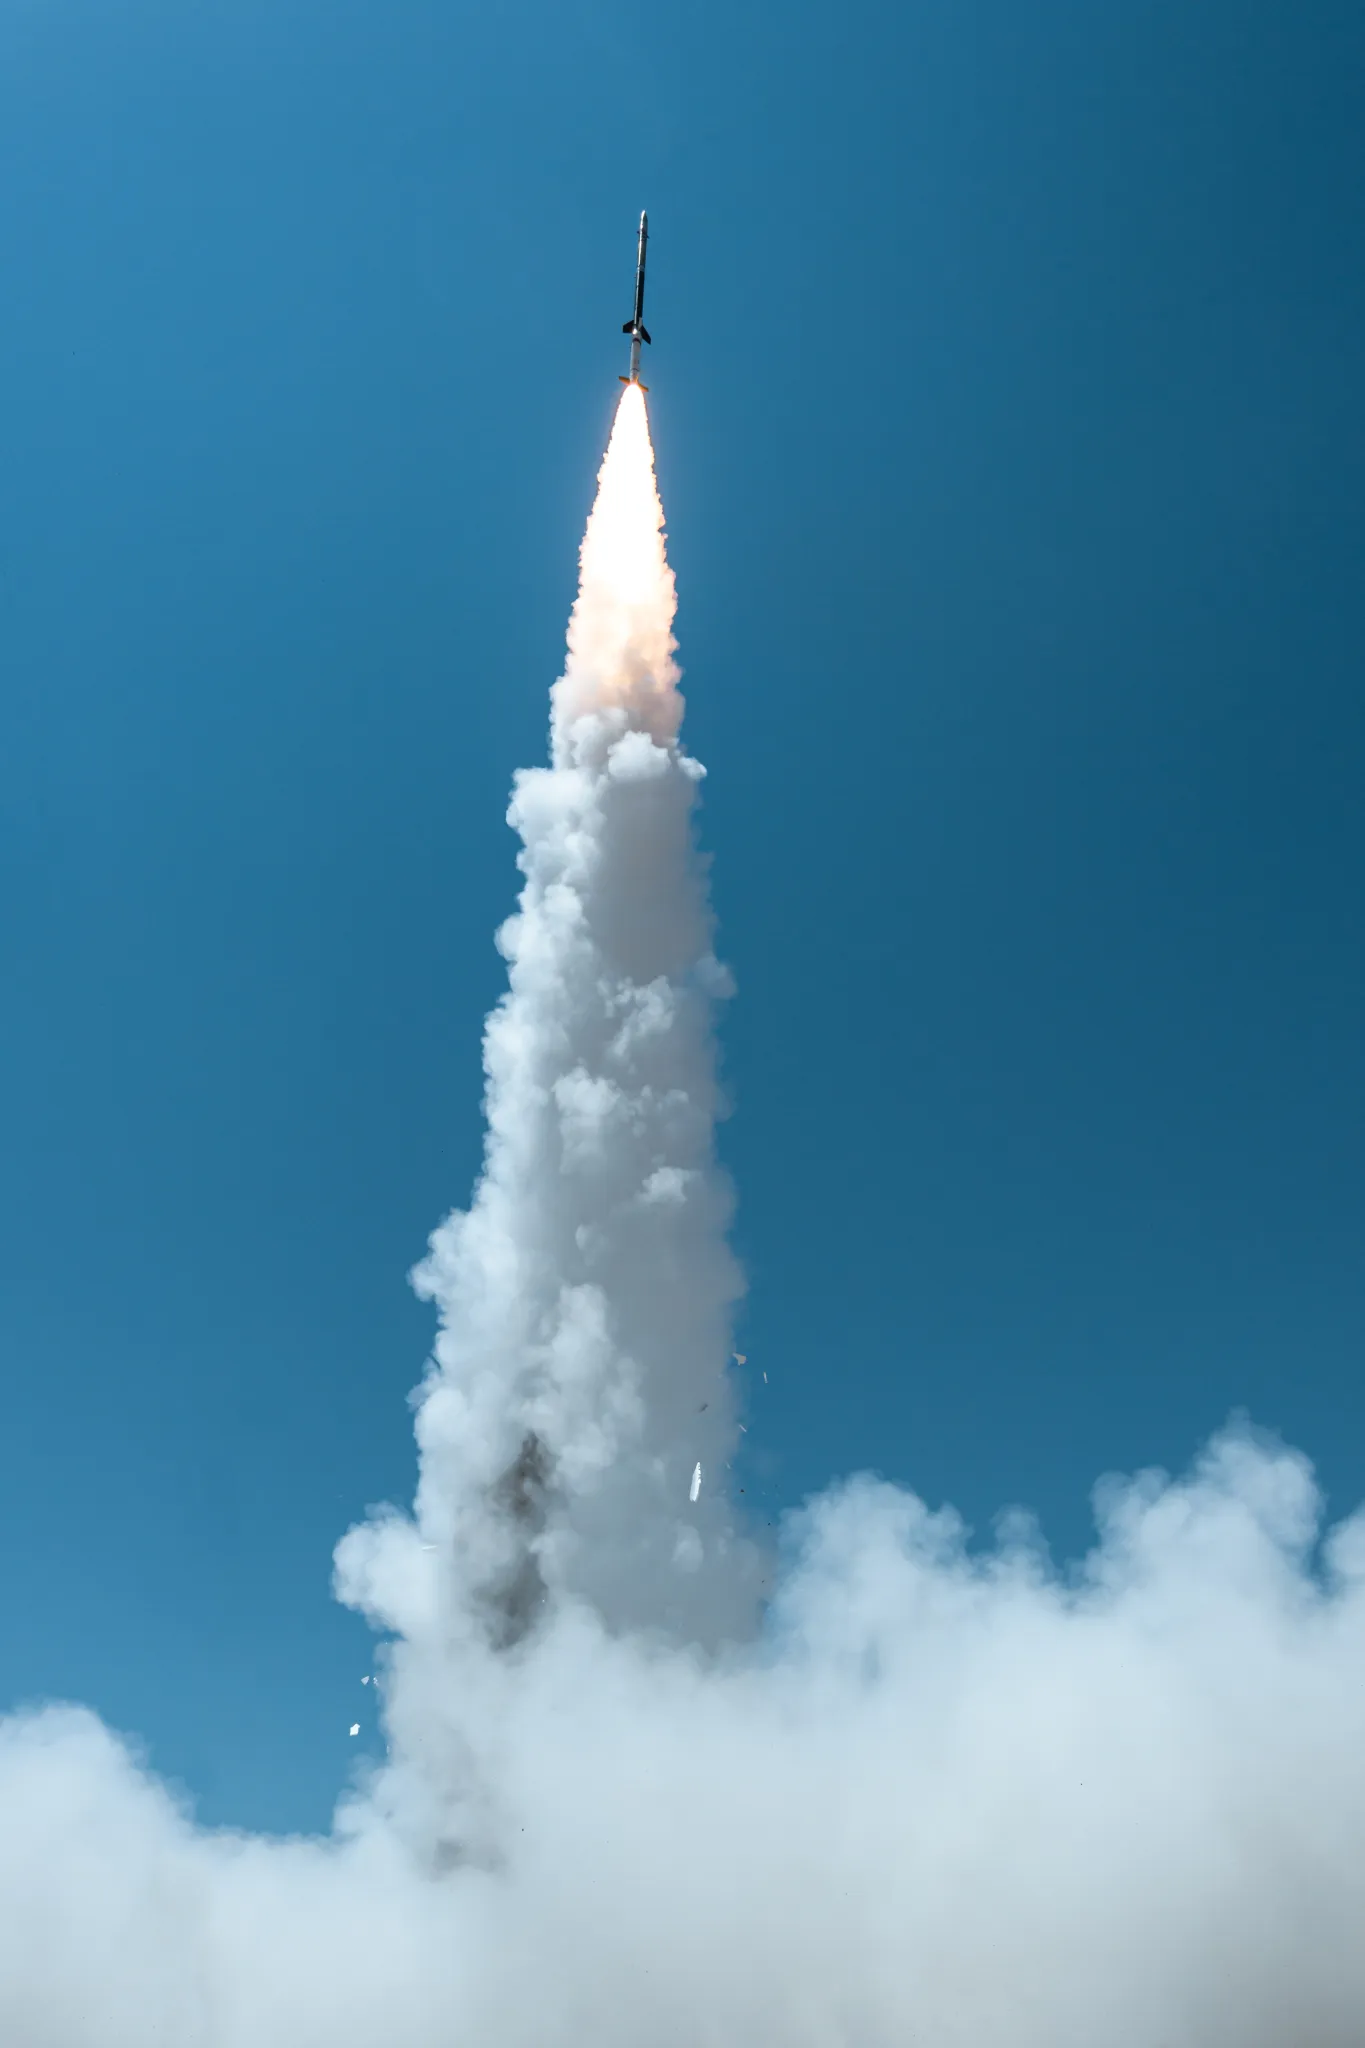 MaGIXS launches from White Sands Missile Range, New Mexico.